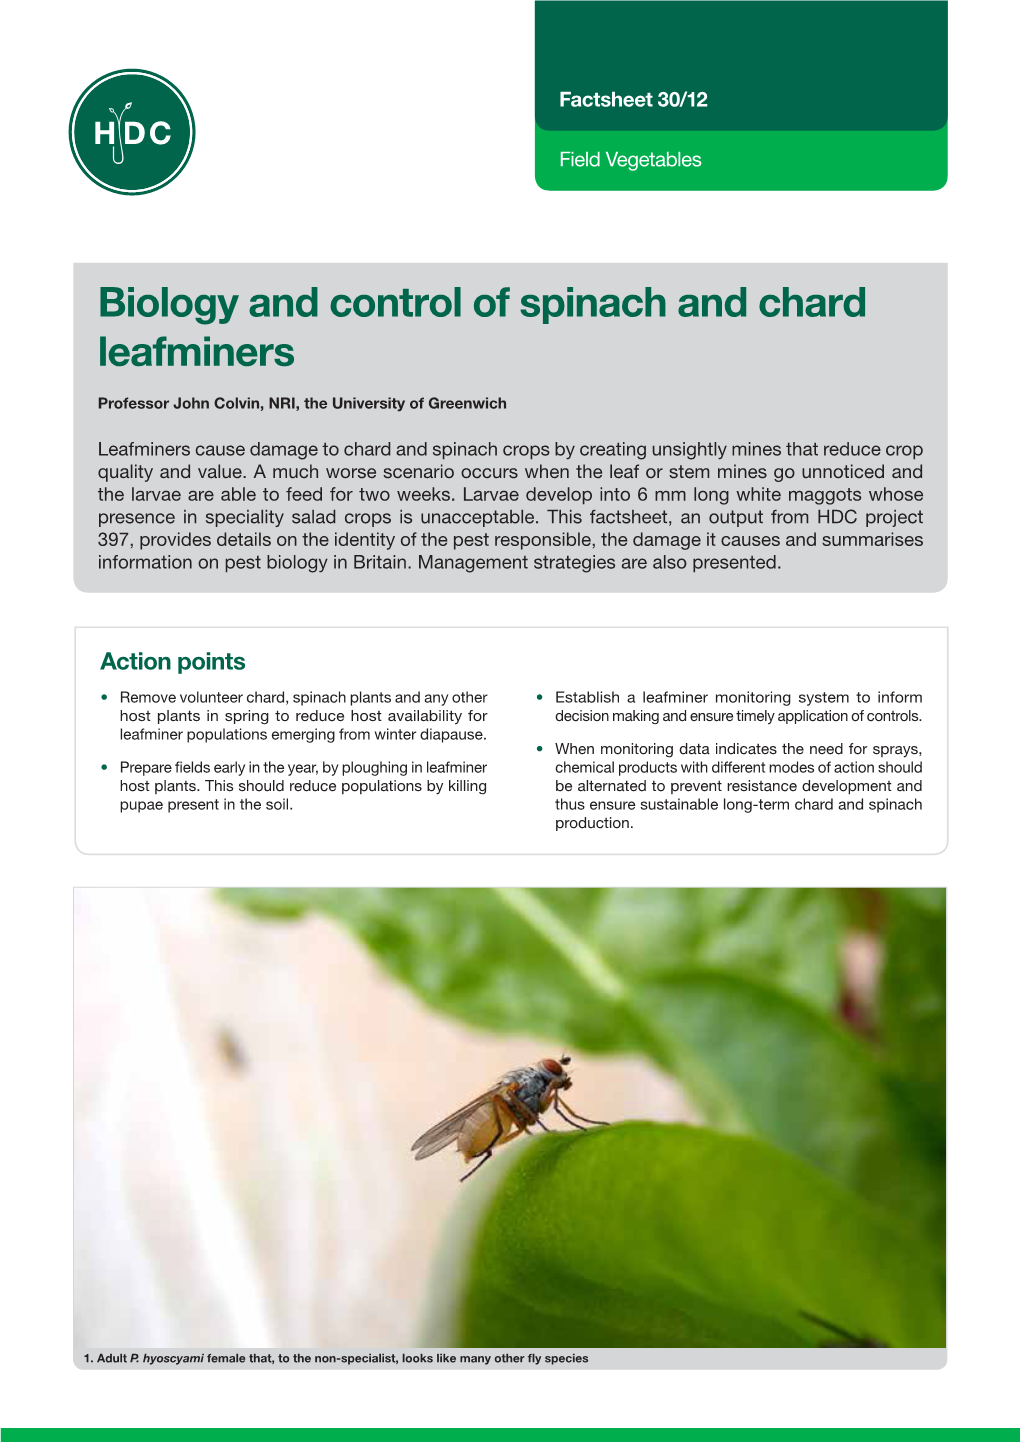 Biology and Control of Spinach and Chard Leafminers